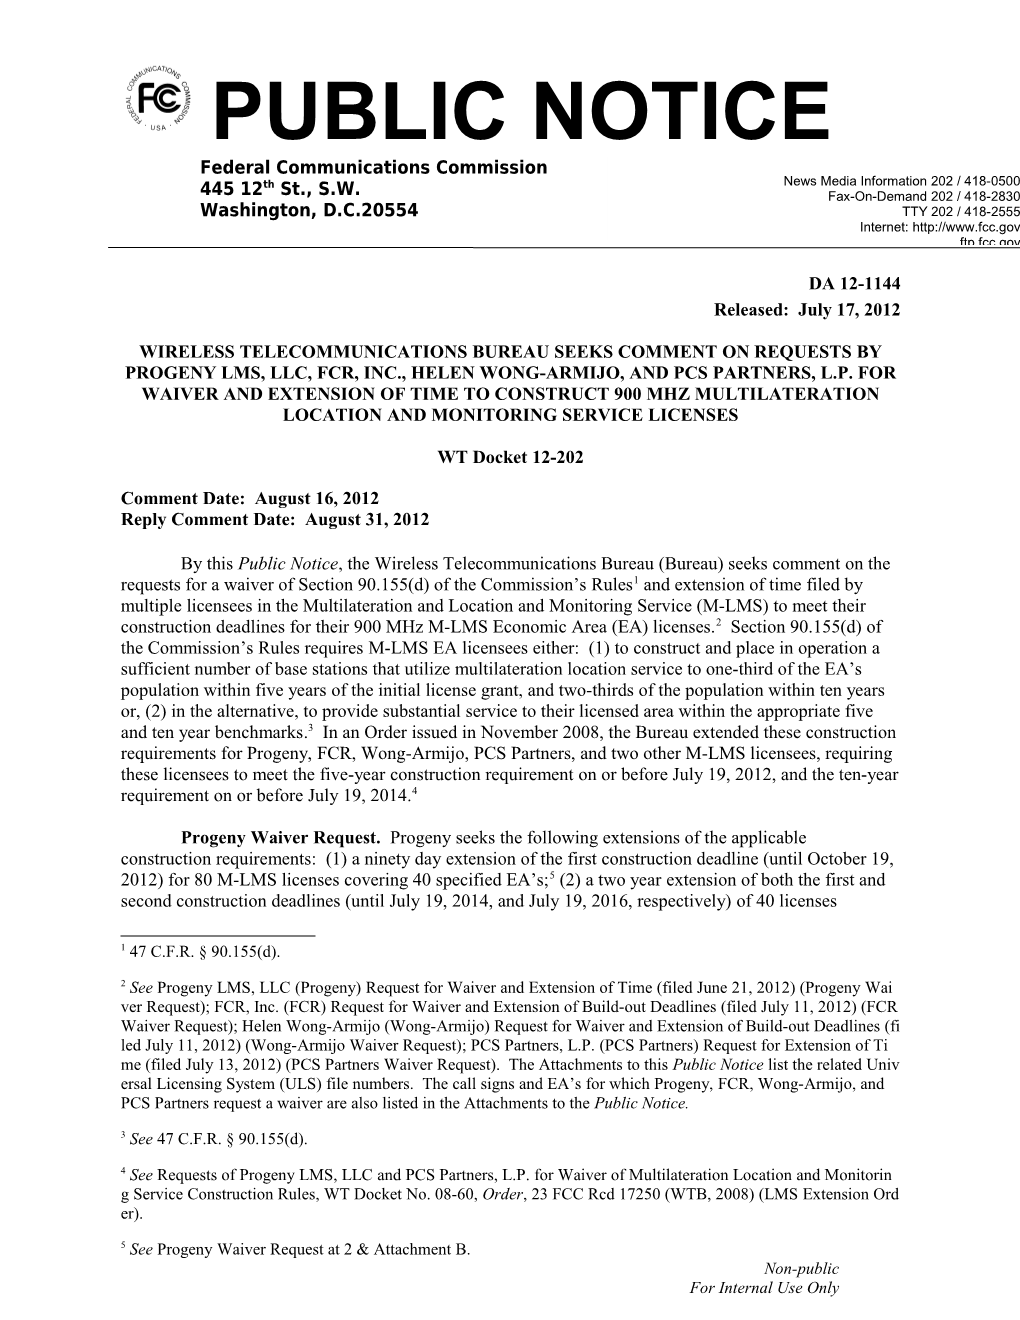 Wireless Telecommunications Bureau Seeks Comment on Requests by Progeny Lms, Llc, Fcr